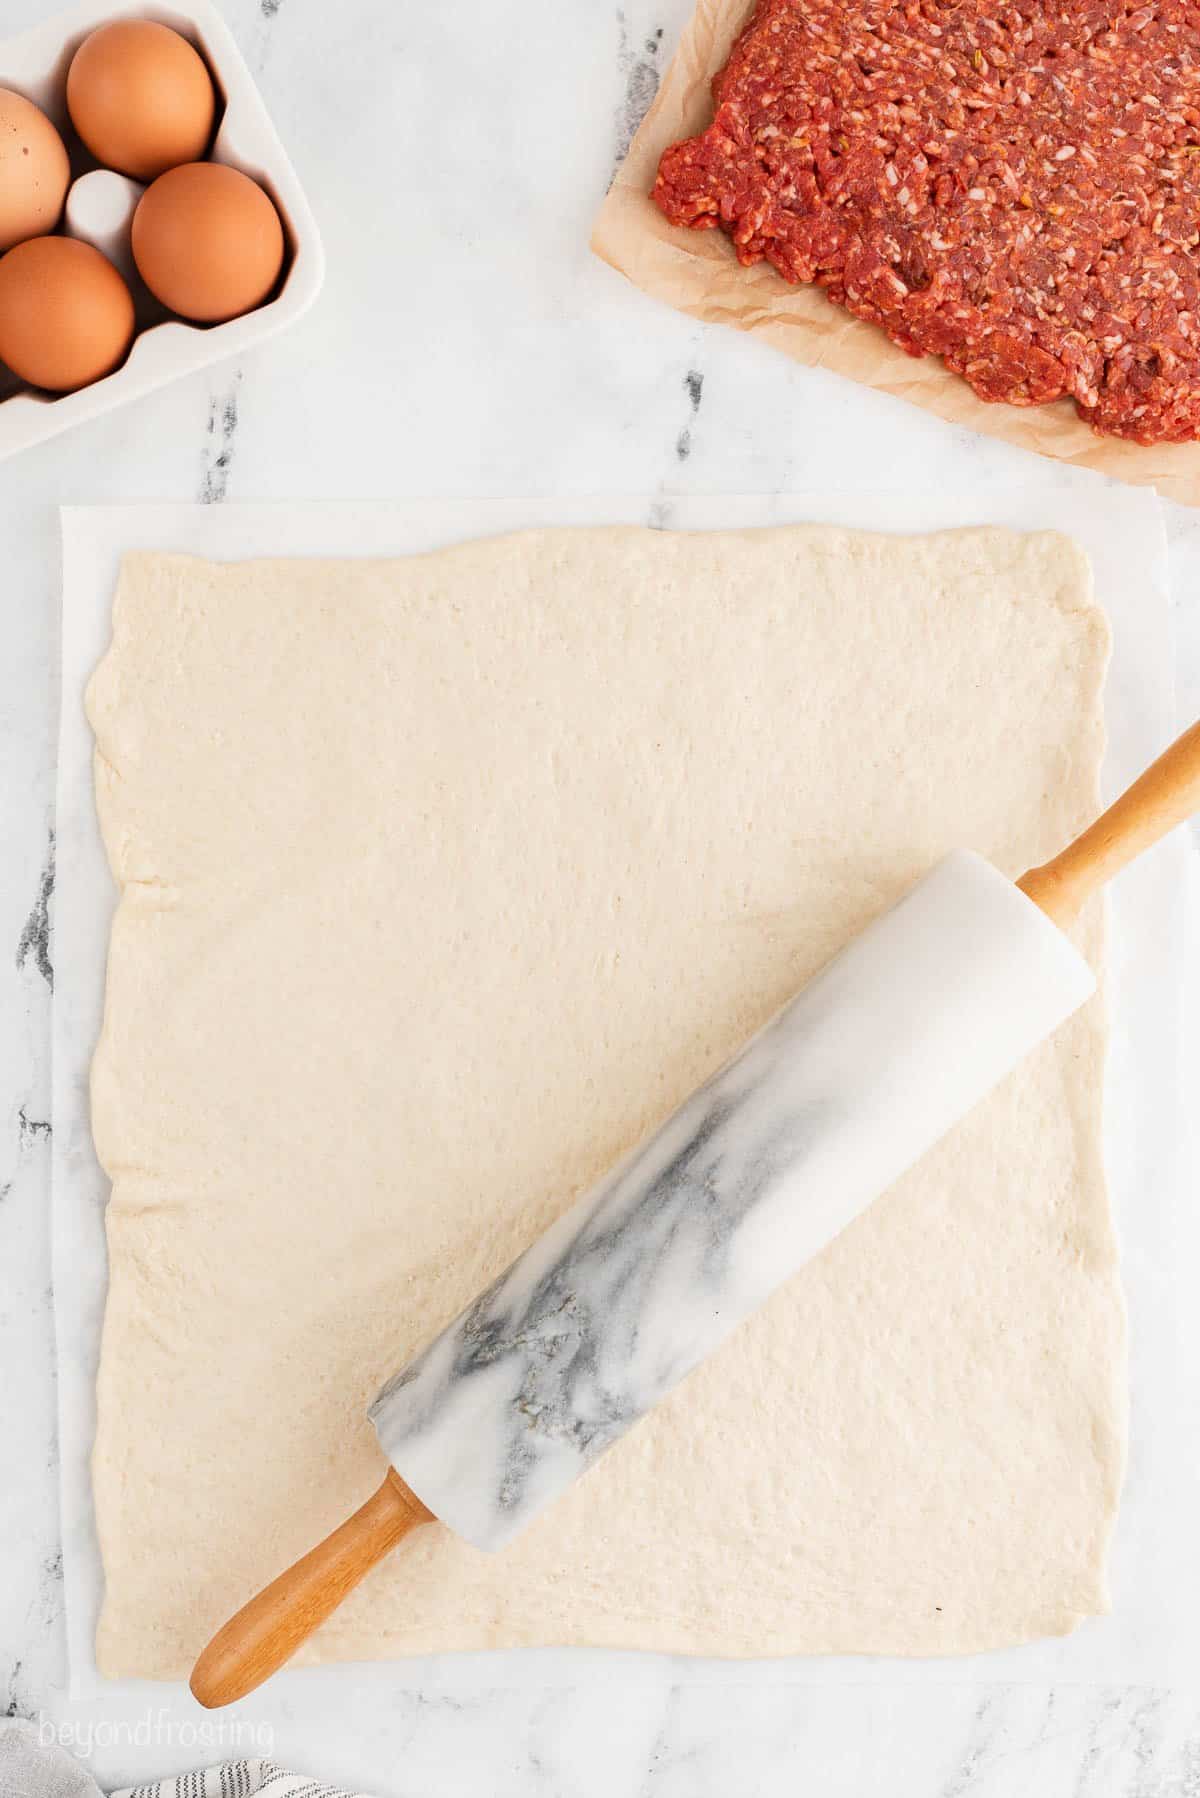 a square of pizza dough rolled out on a piece of parchment paper